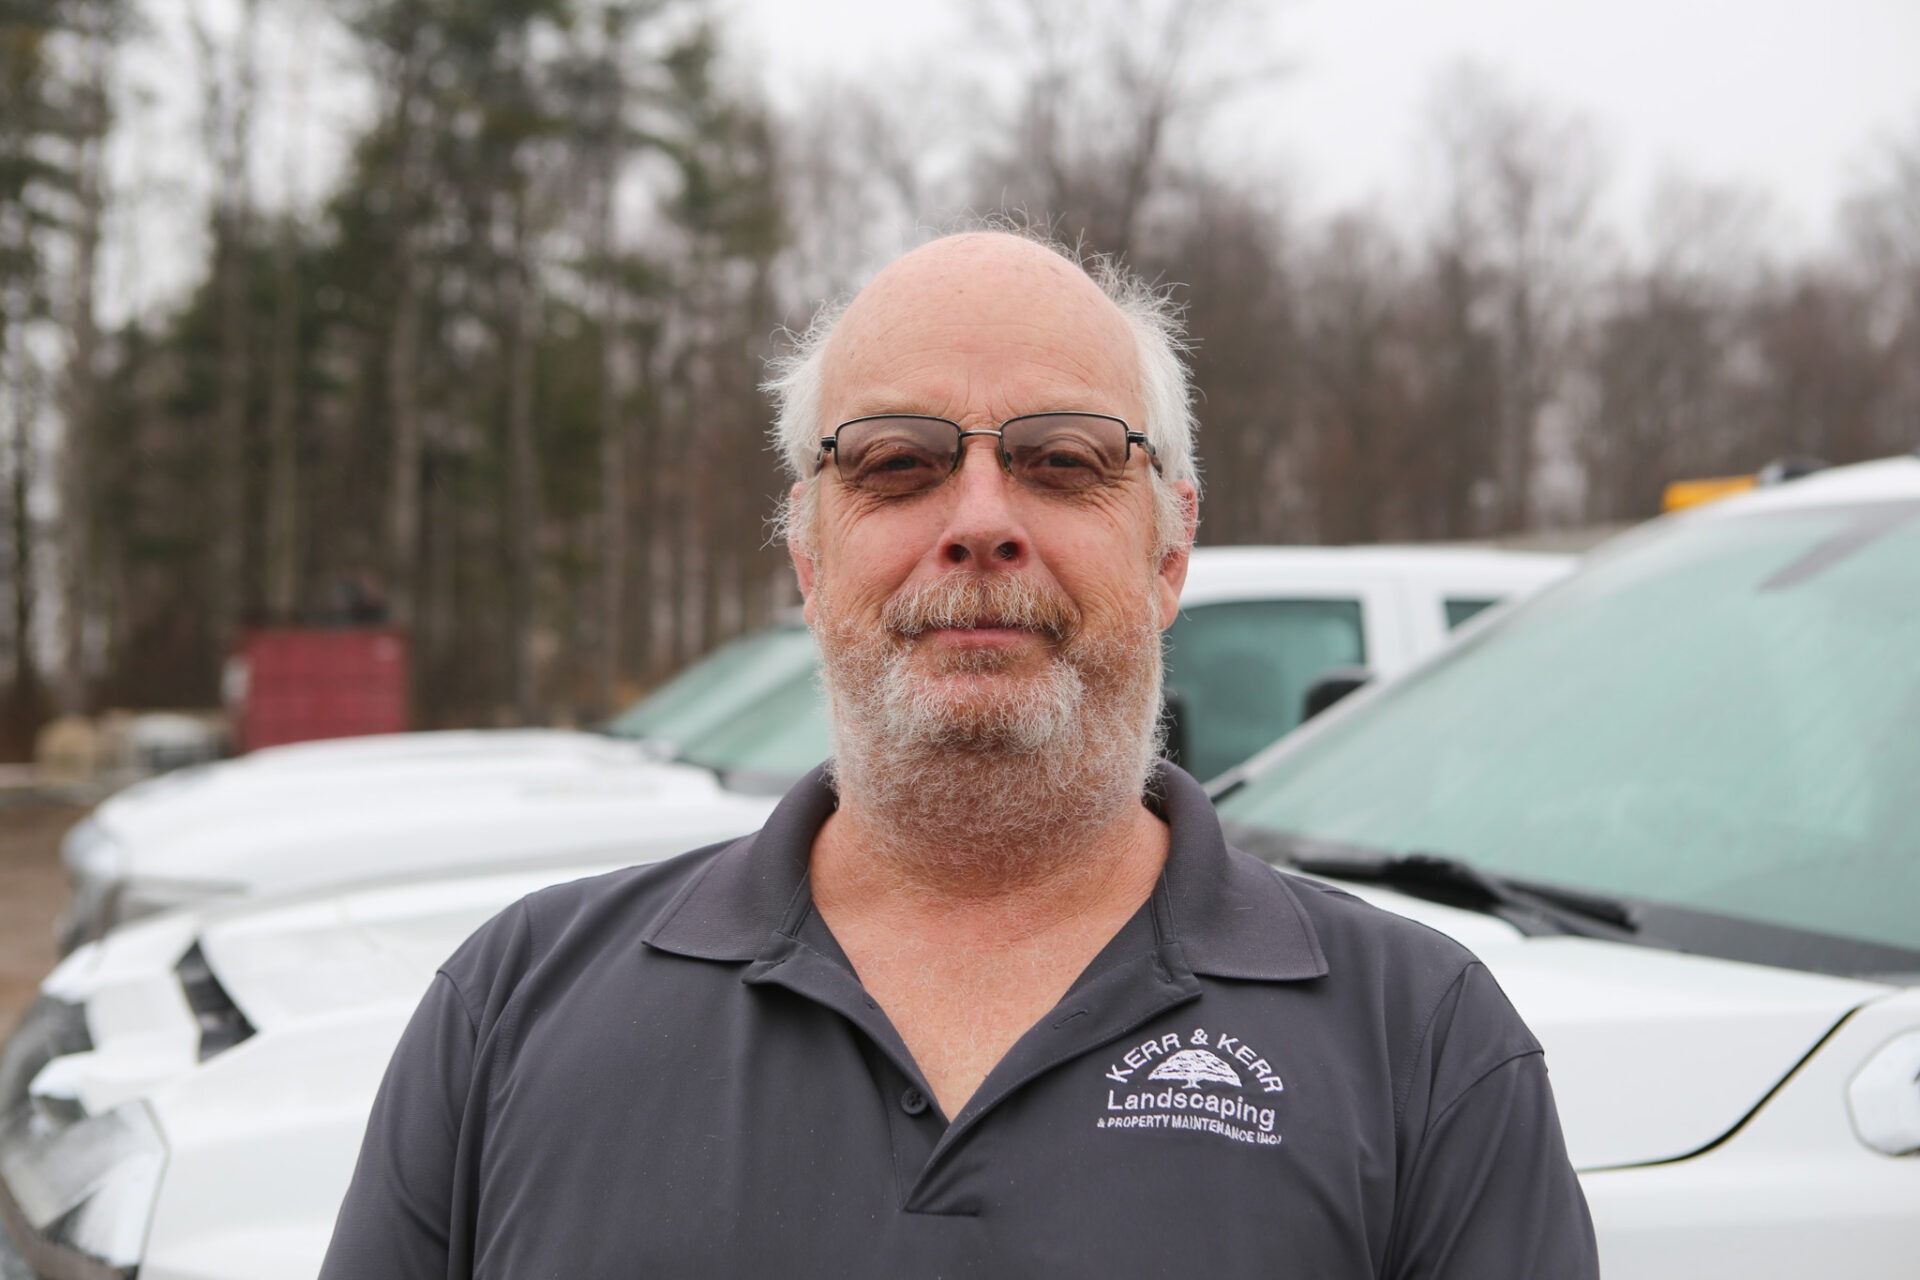 A person with glasses and a beard stands in front of white vehicles, wearing a black polo shirt with a landscaping company logo.